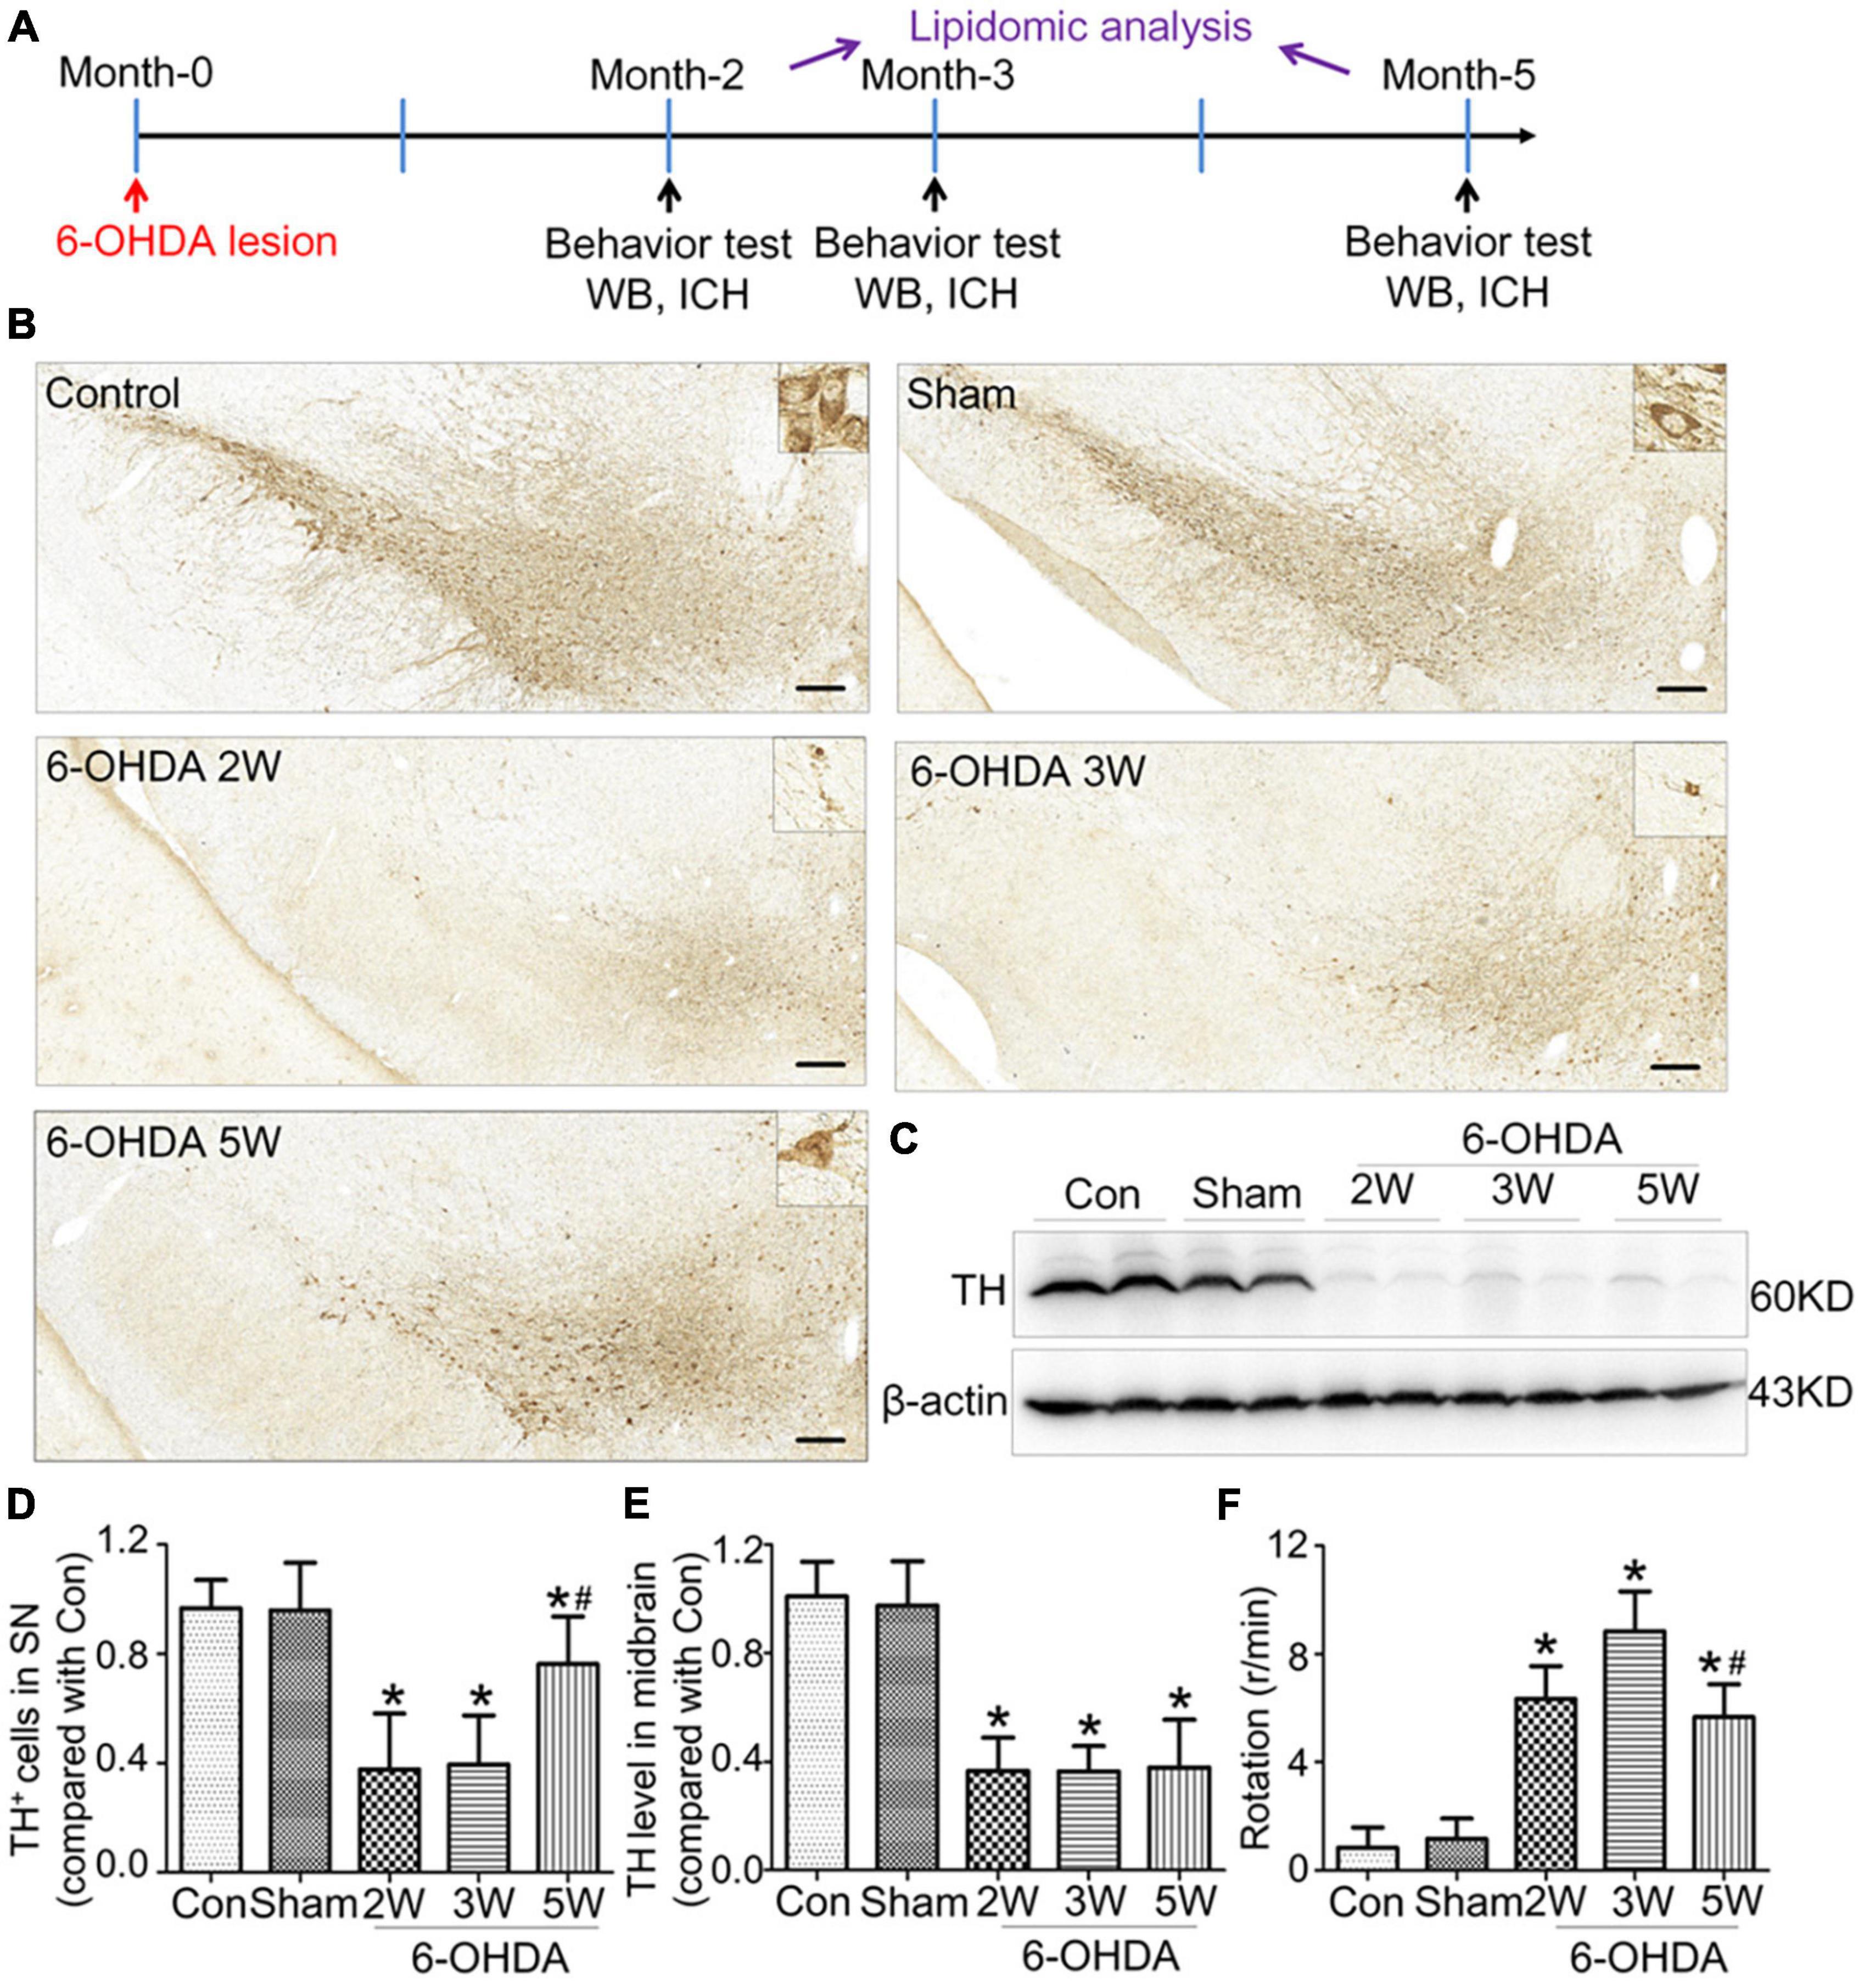 Lipid profiles in the cerebrospinal fluid of rats with 6-hydroxydopamine-induced lesions as a model of Parkinson’s disease